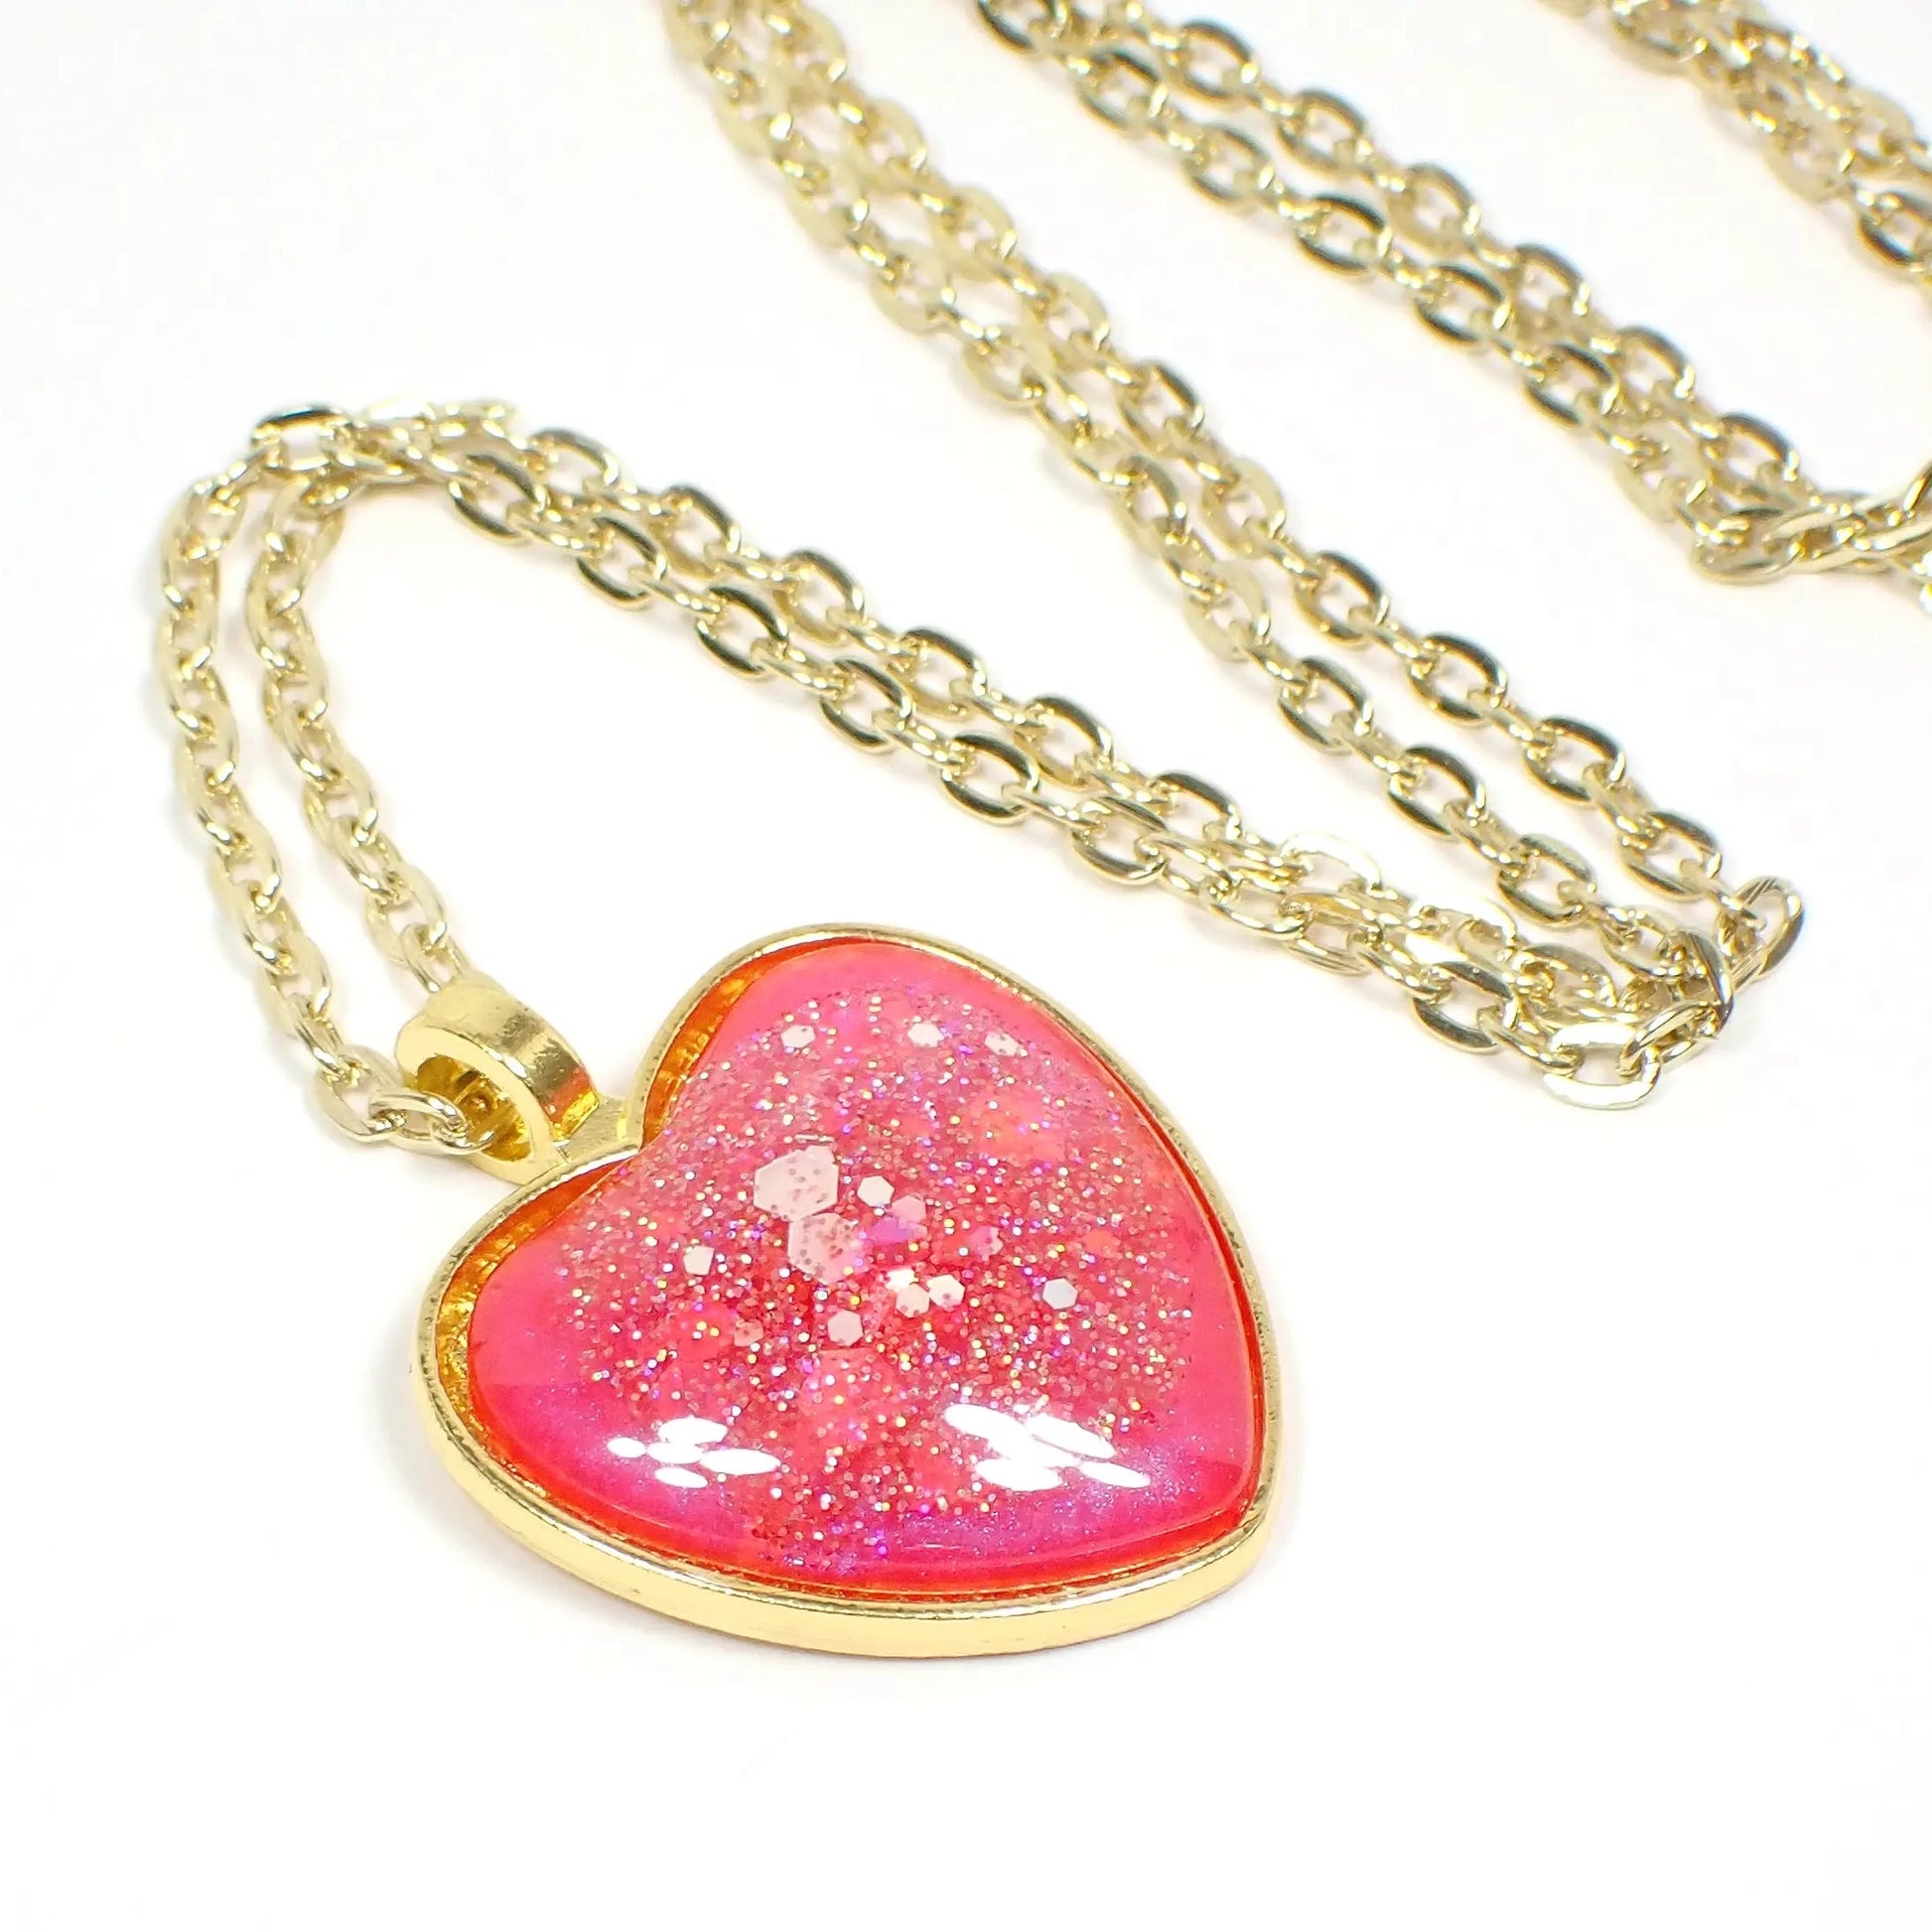 Enlarged view of the gold plated handmade resin heart necklace. The metal is gold in color. The heart has bright pearly pink resin with chunky iridescent glitter. 